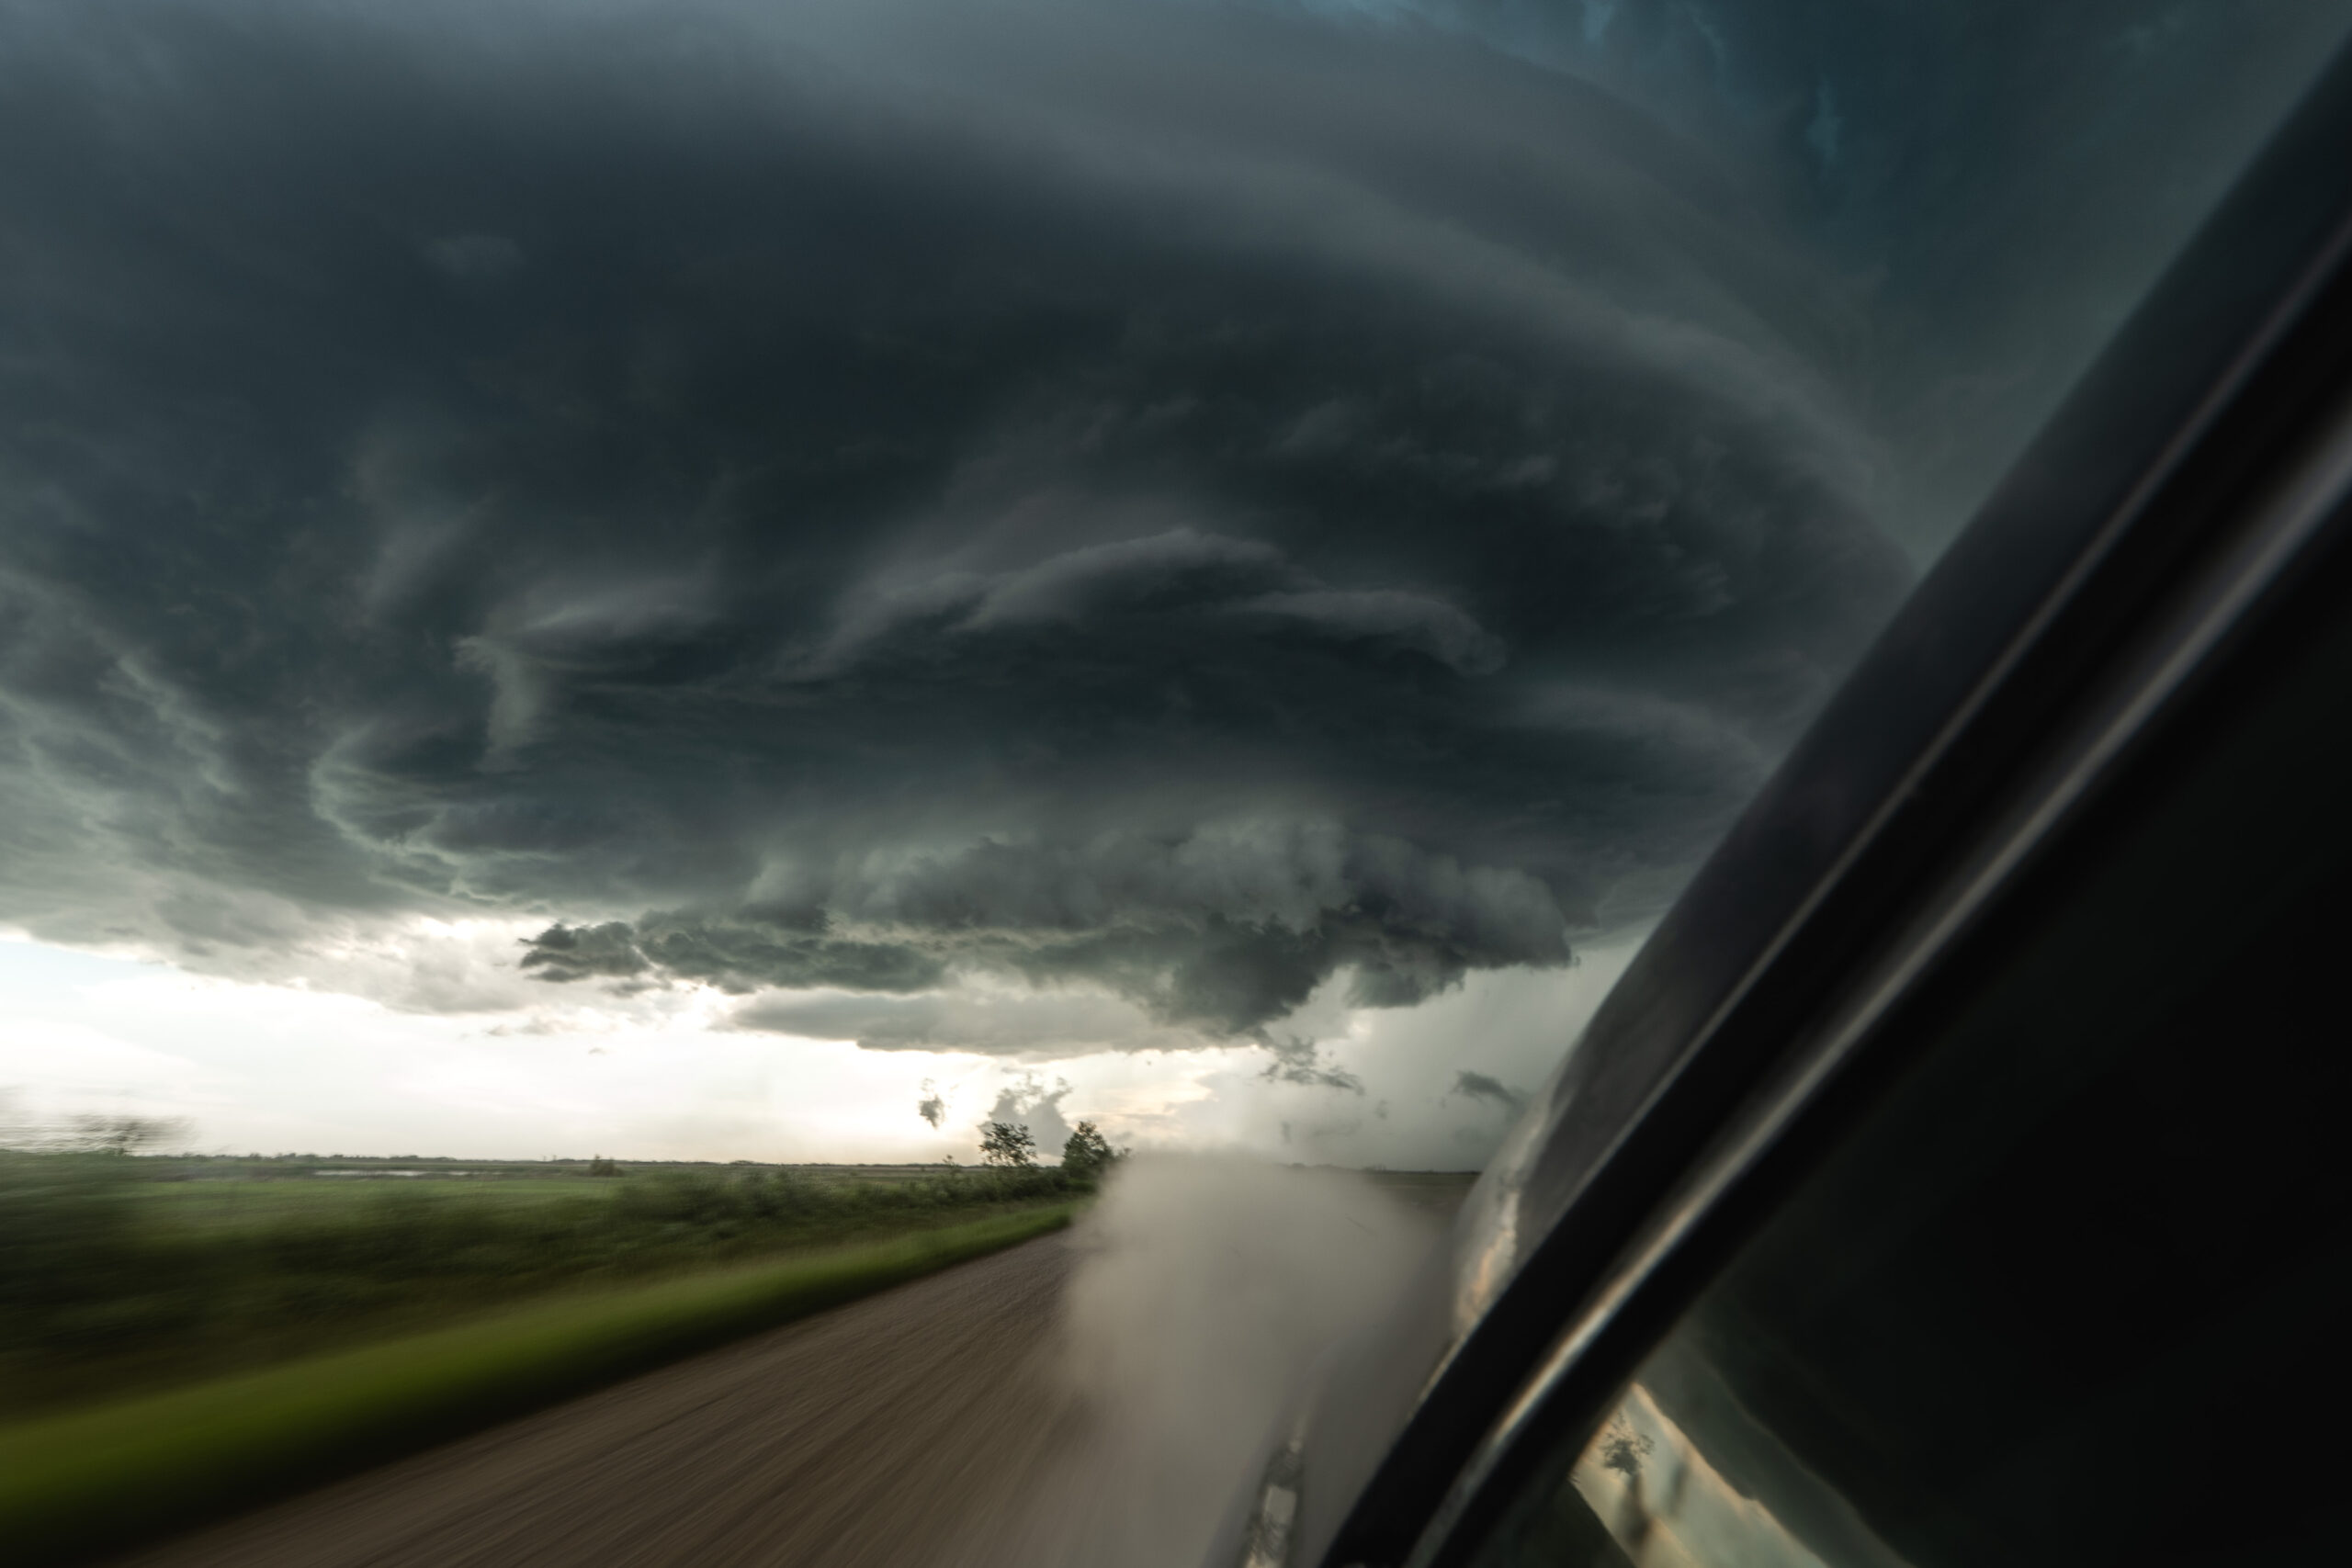 Quickly driving to get in position to capture a large supercell storm in Canada with storm chaser Tanner Charles